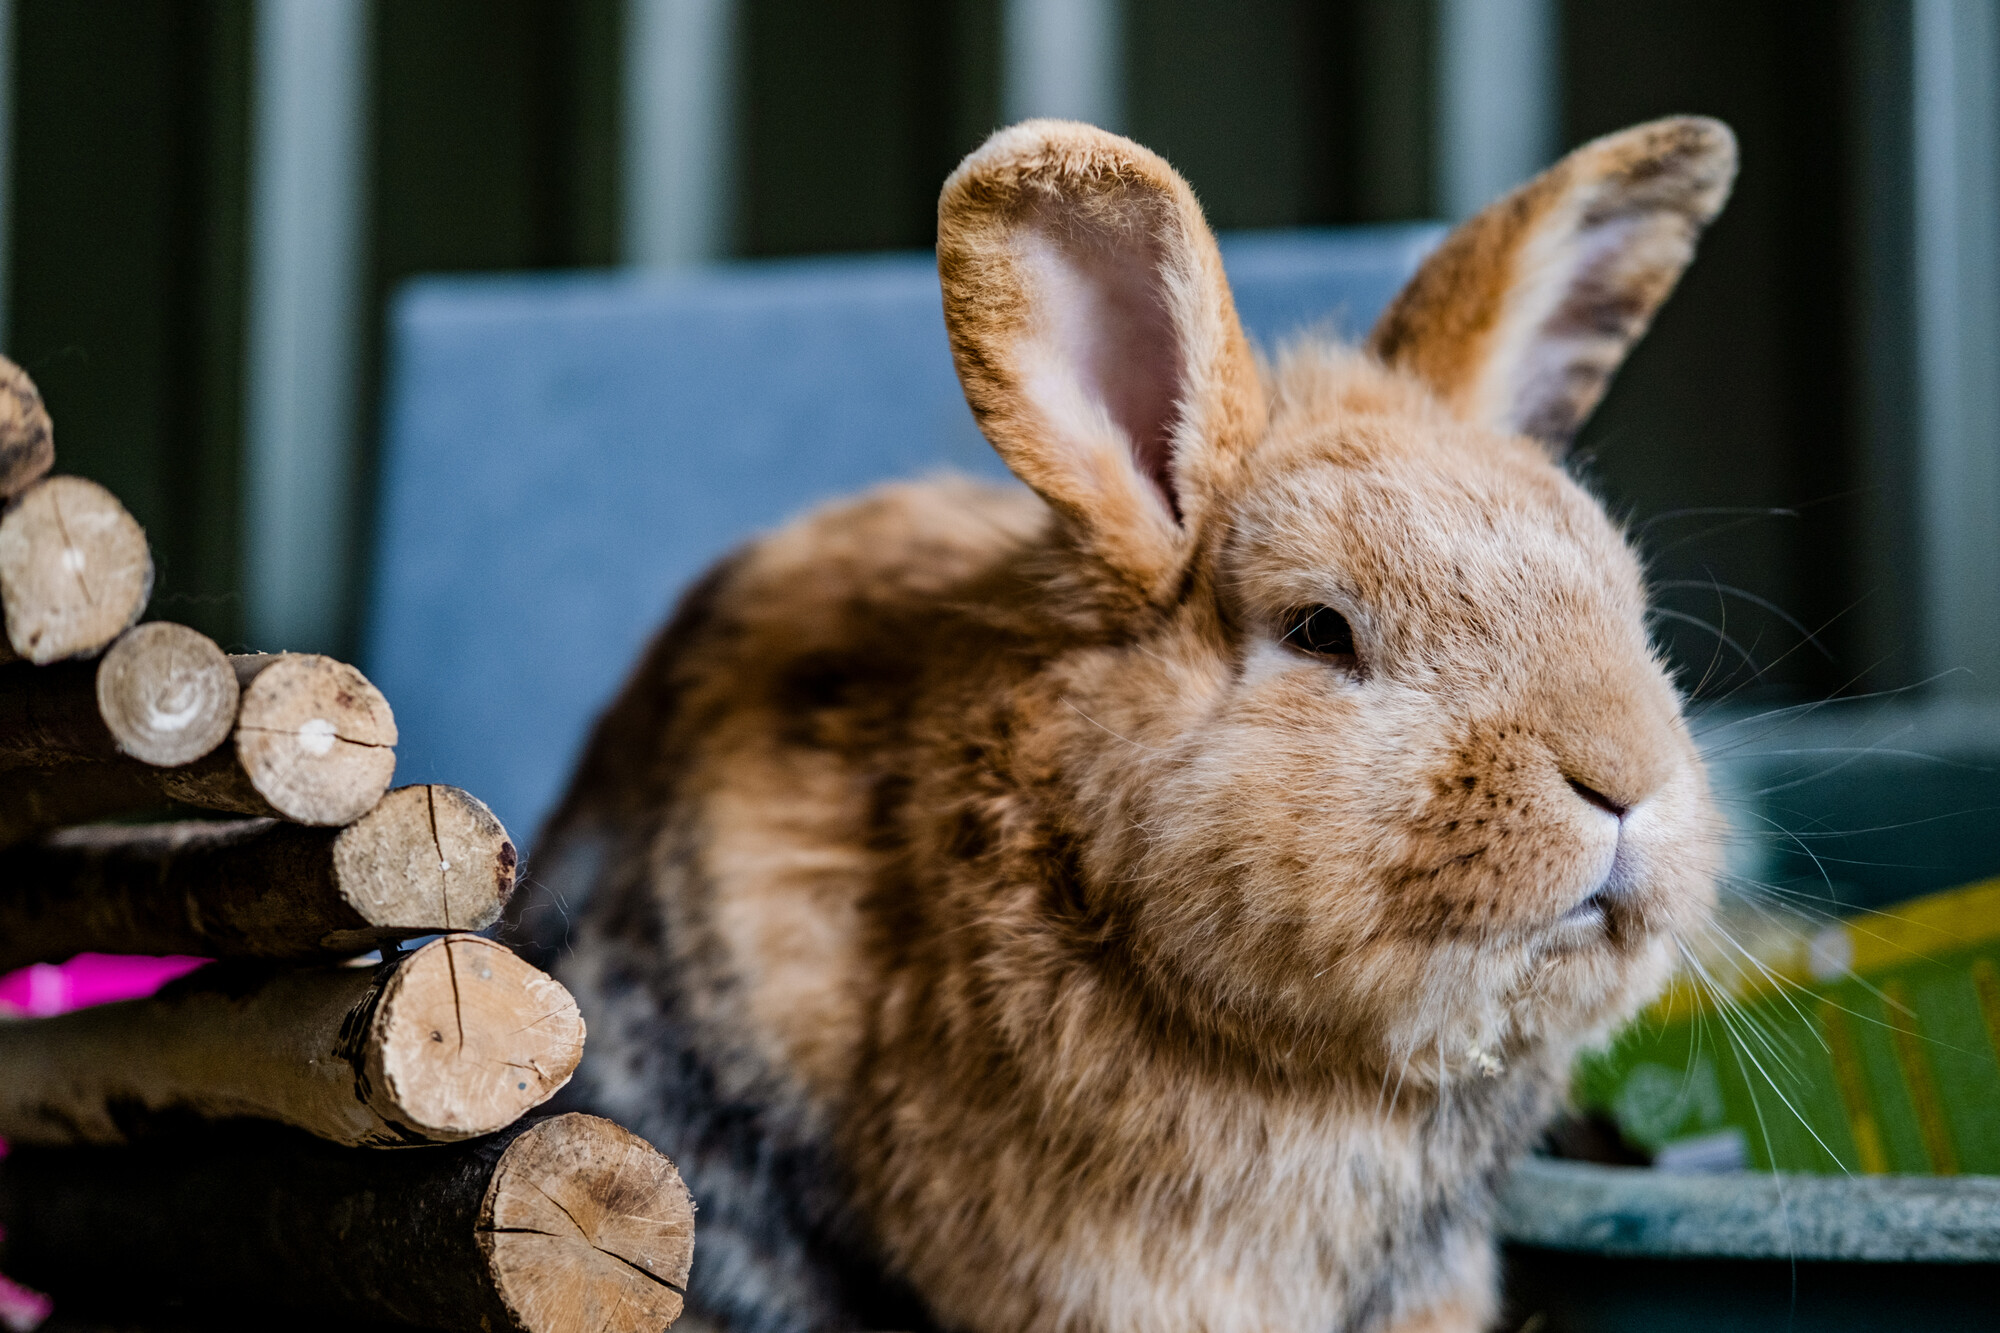 A ginger rabbit sits next to a wooden hideaway in their accommodation.